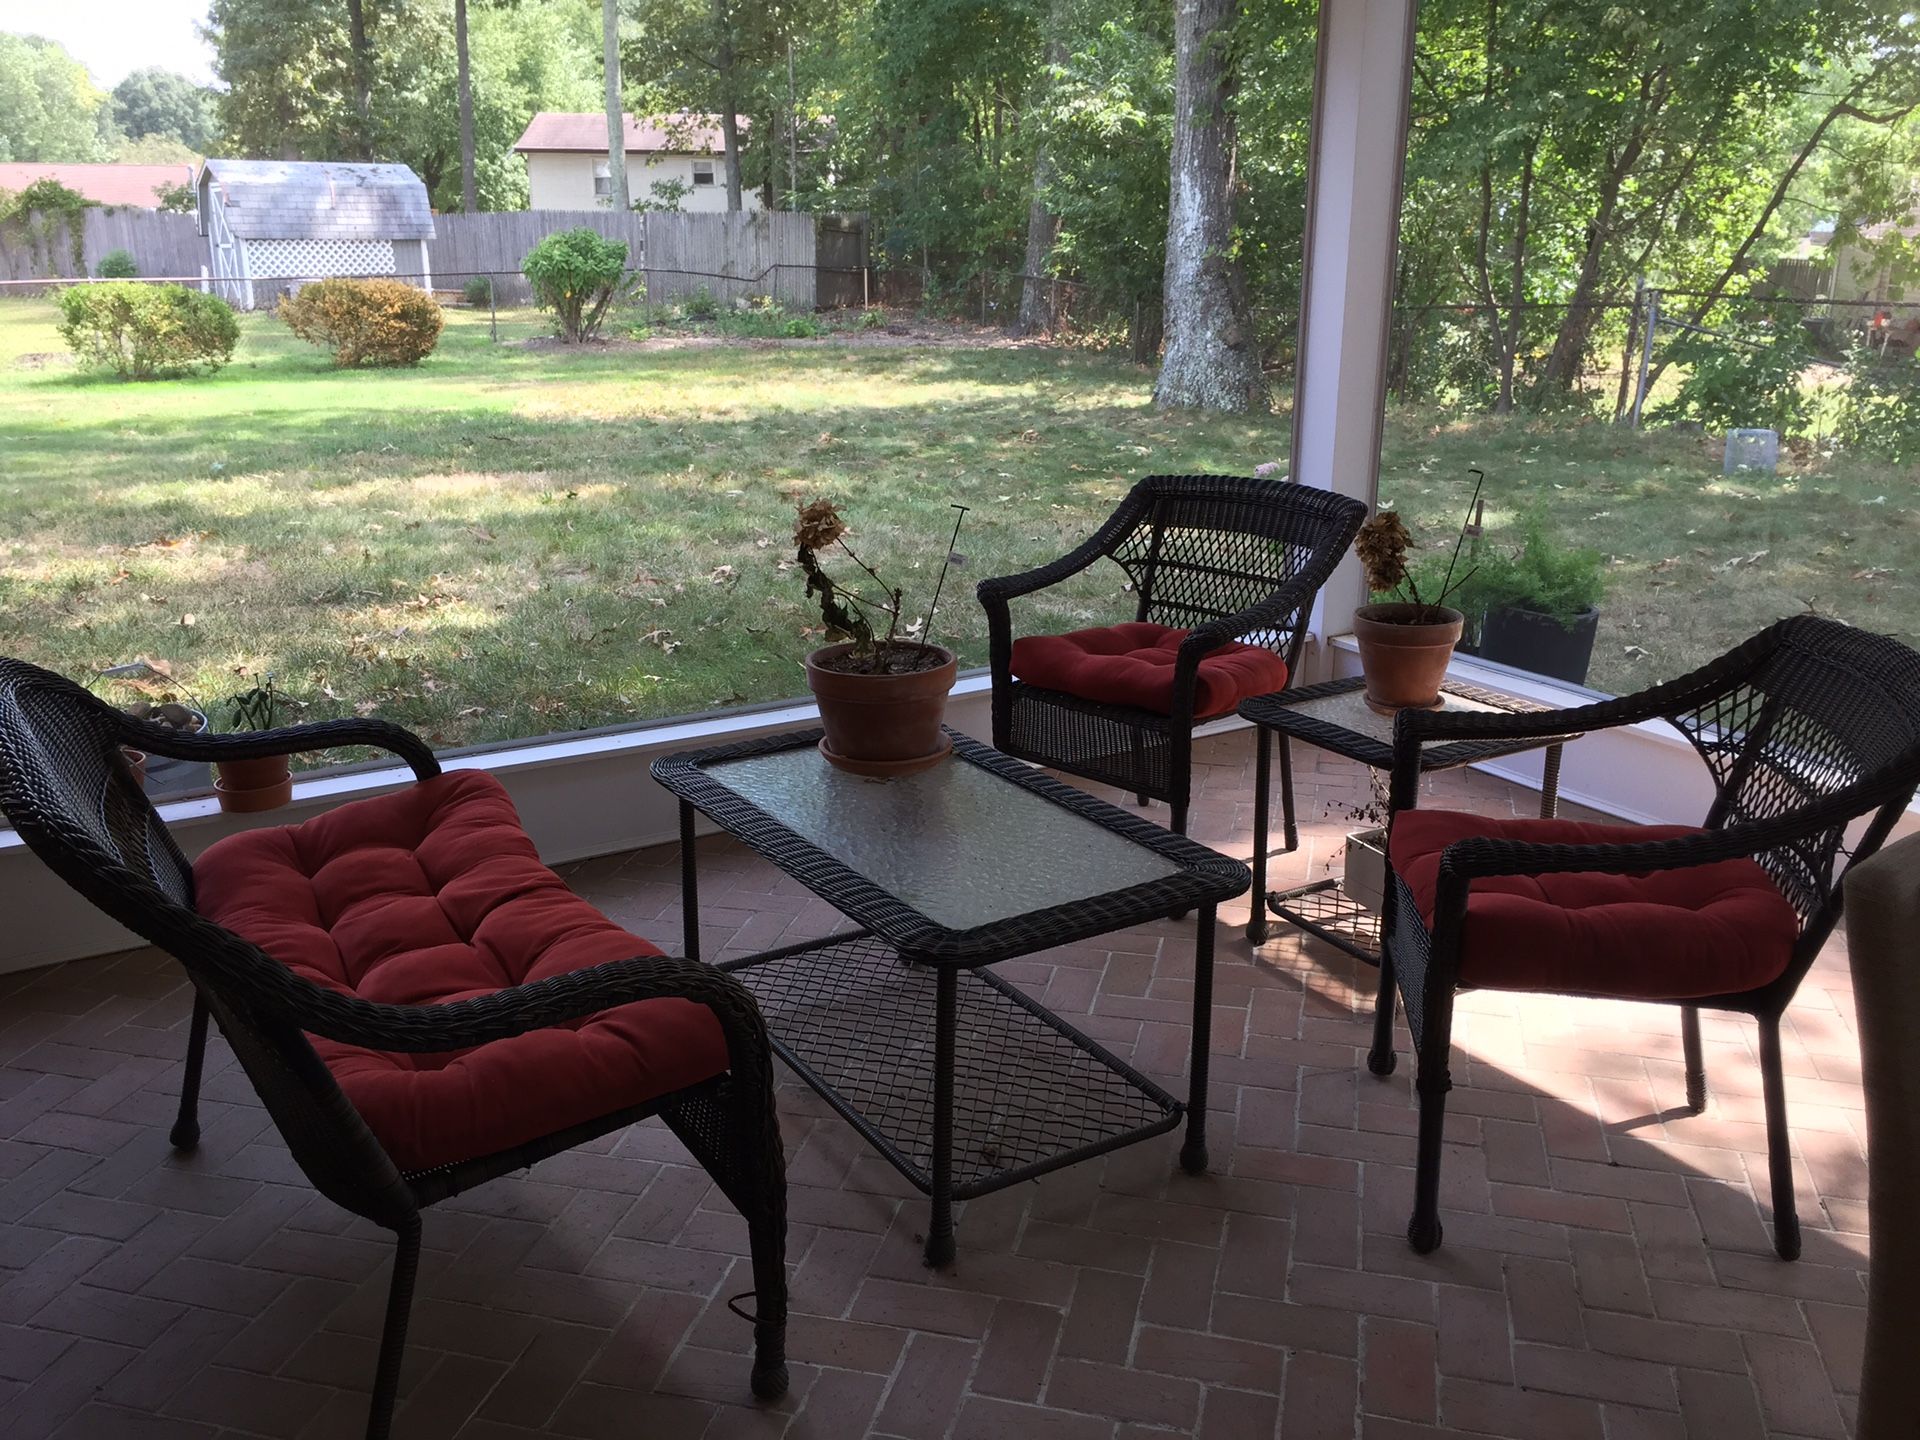 Patio furniture from Lowe’s